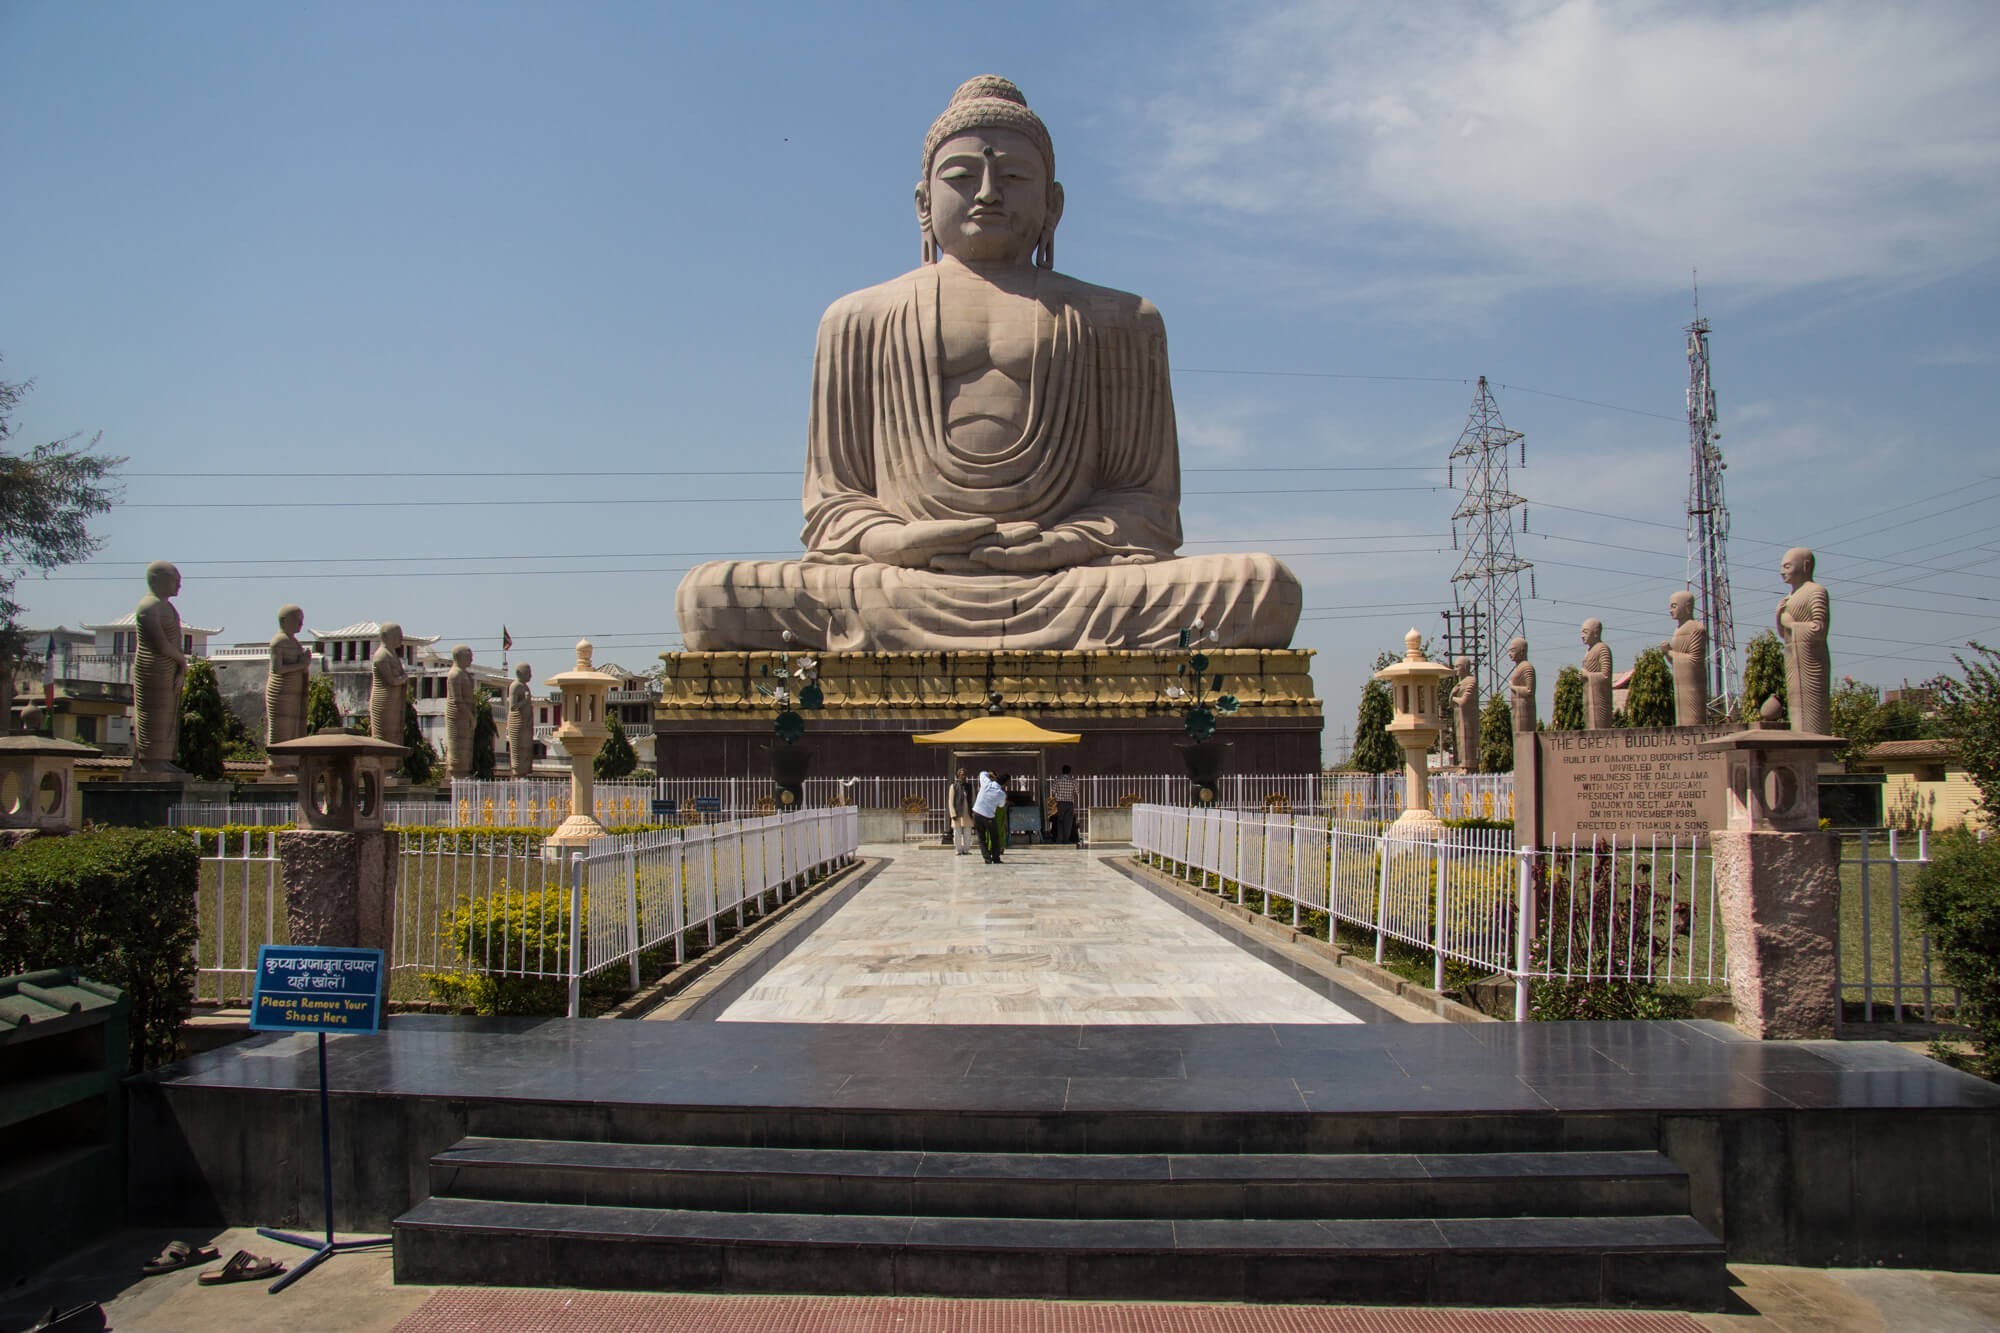 By Andrew Moore from Johannesburg, South Africa — Giant Buddha, CC BY-SA 2.0, <a href=